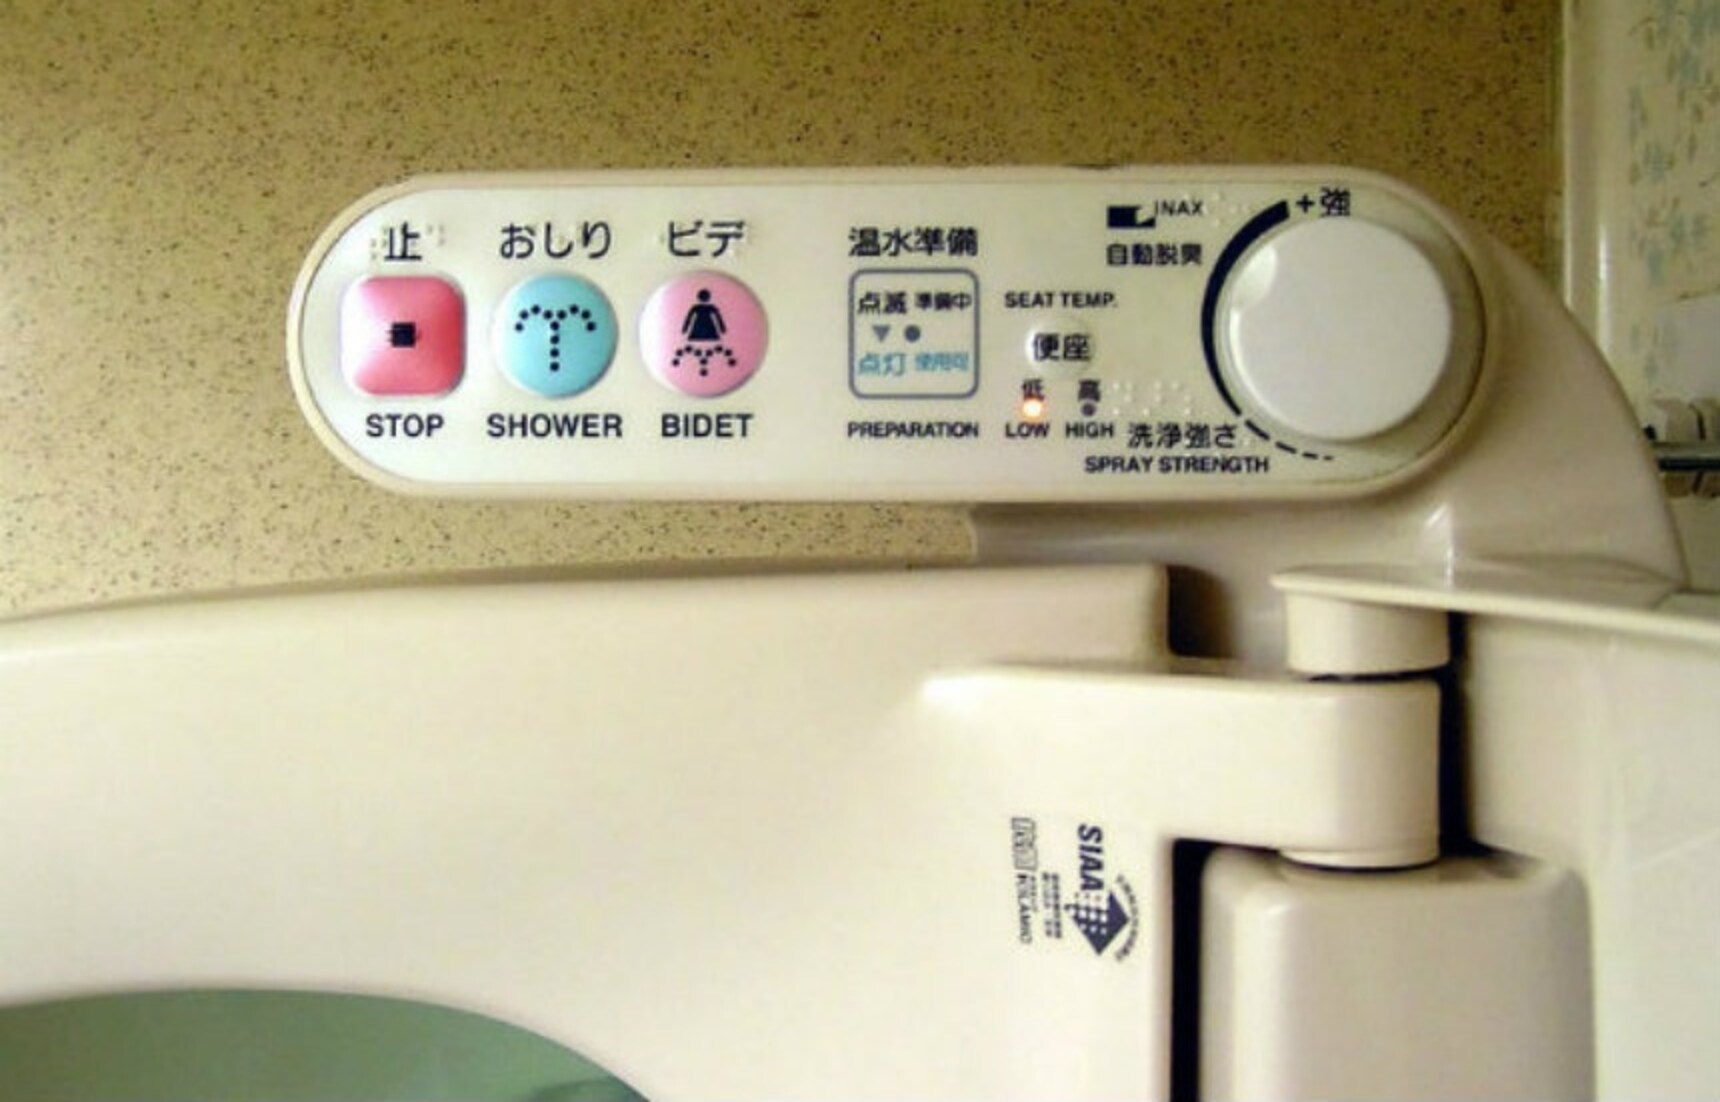 10 Things That Might Surprise You in Japan